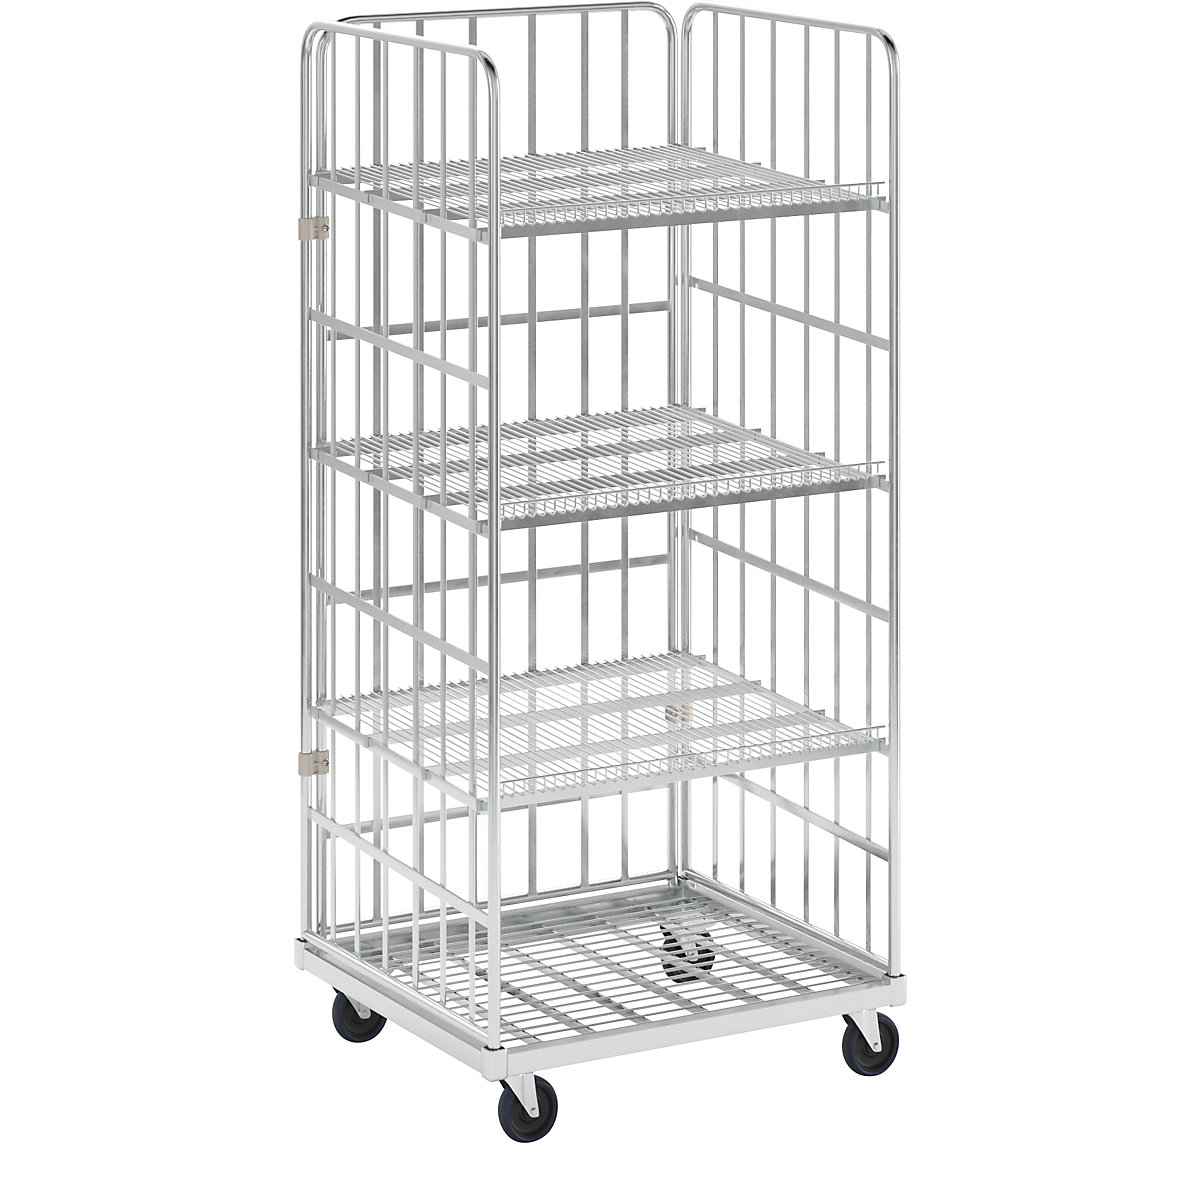 Roll cage incl. shelves